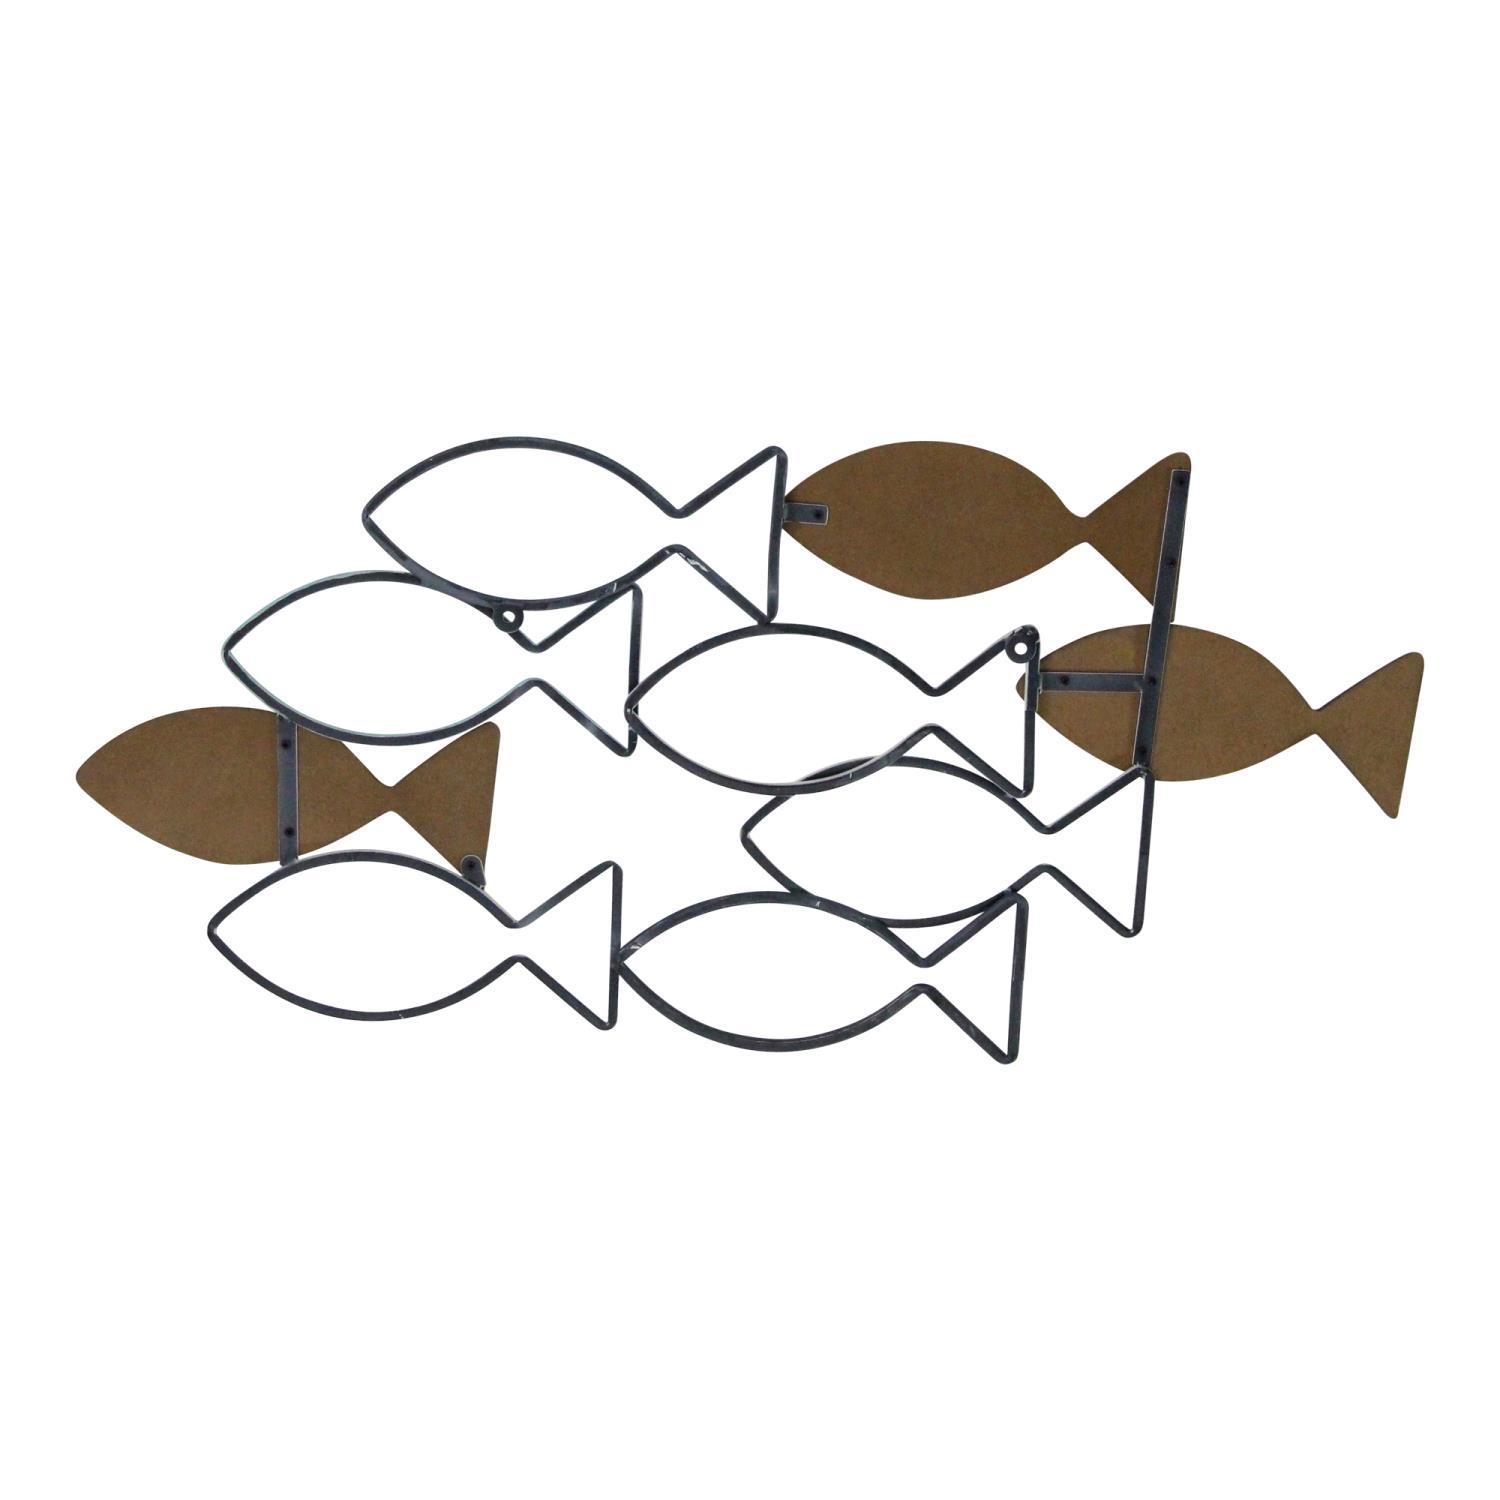 Stratton Home Decor Wood And Metal School Of Fish Wall Decor S23810